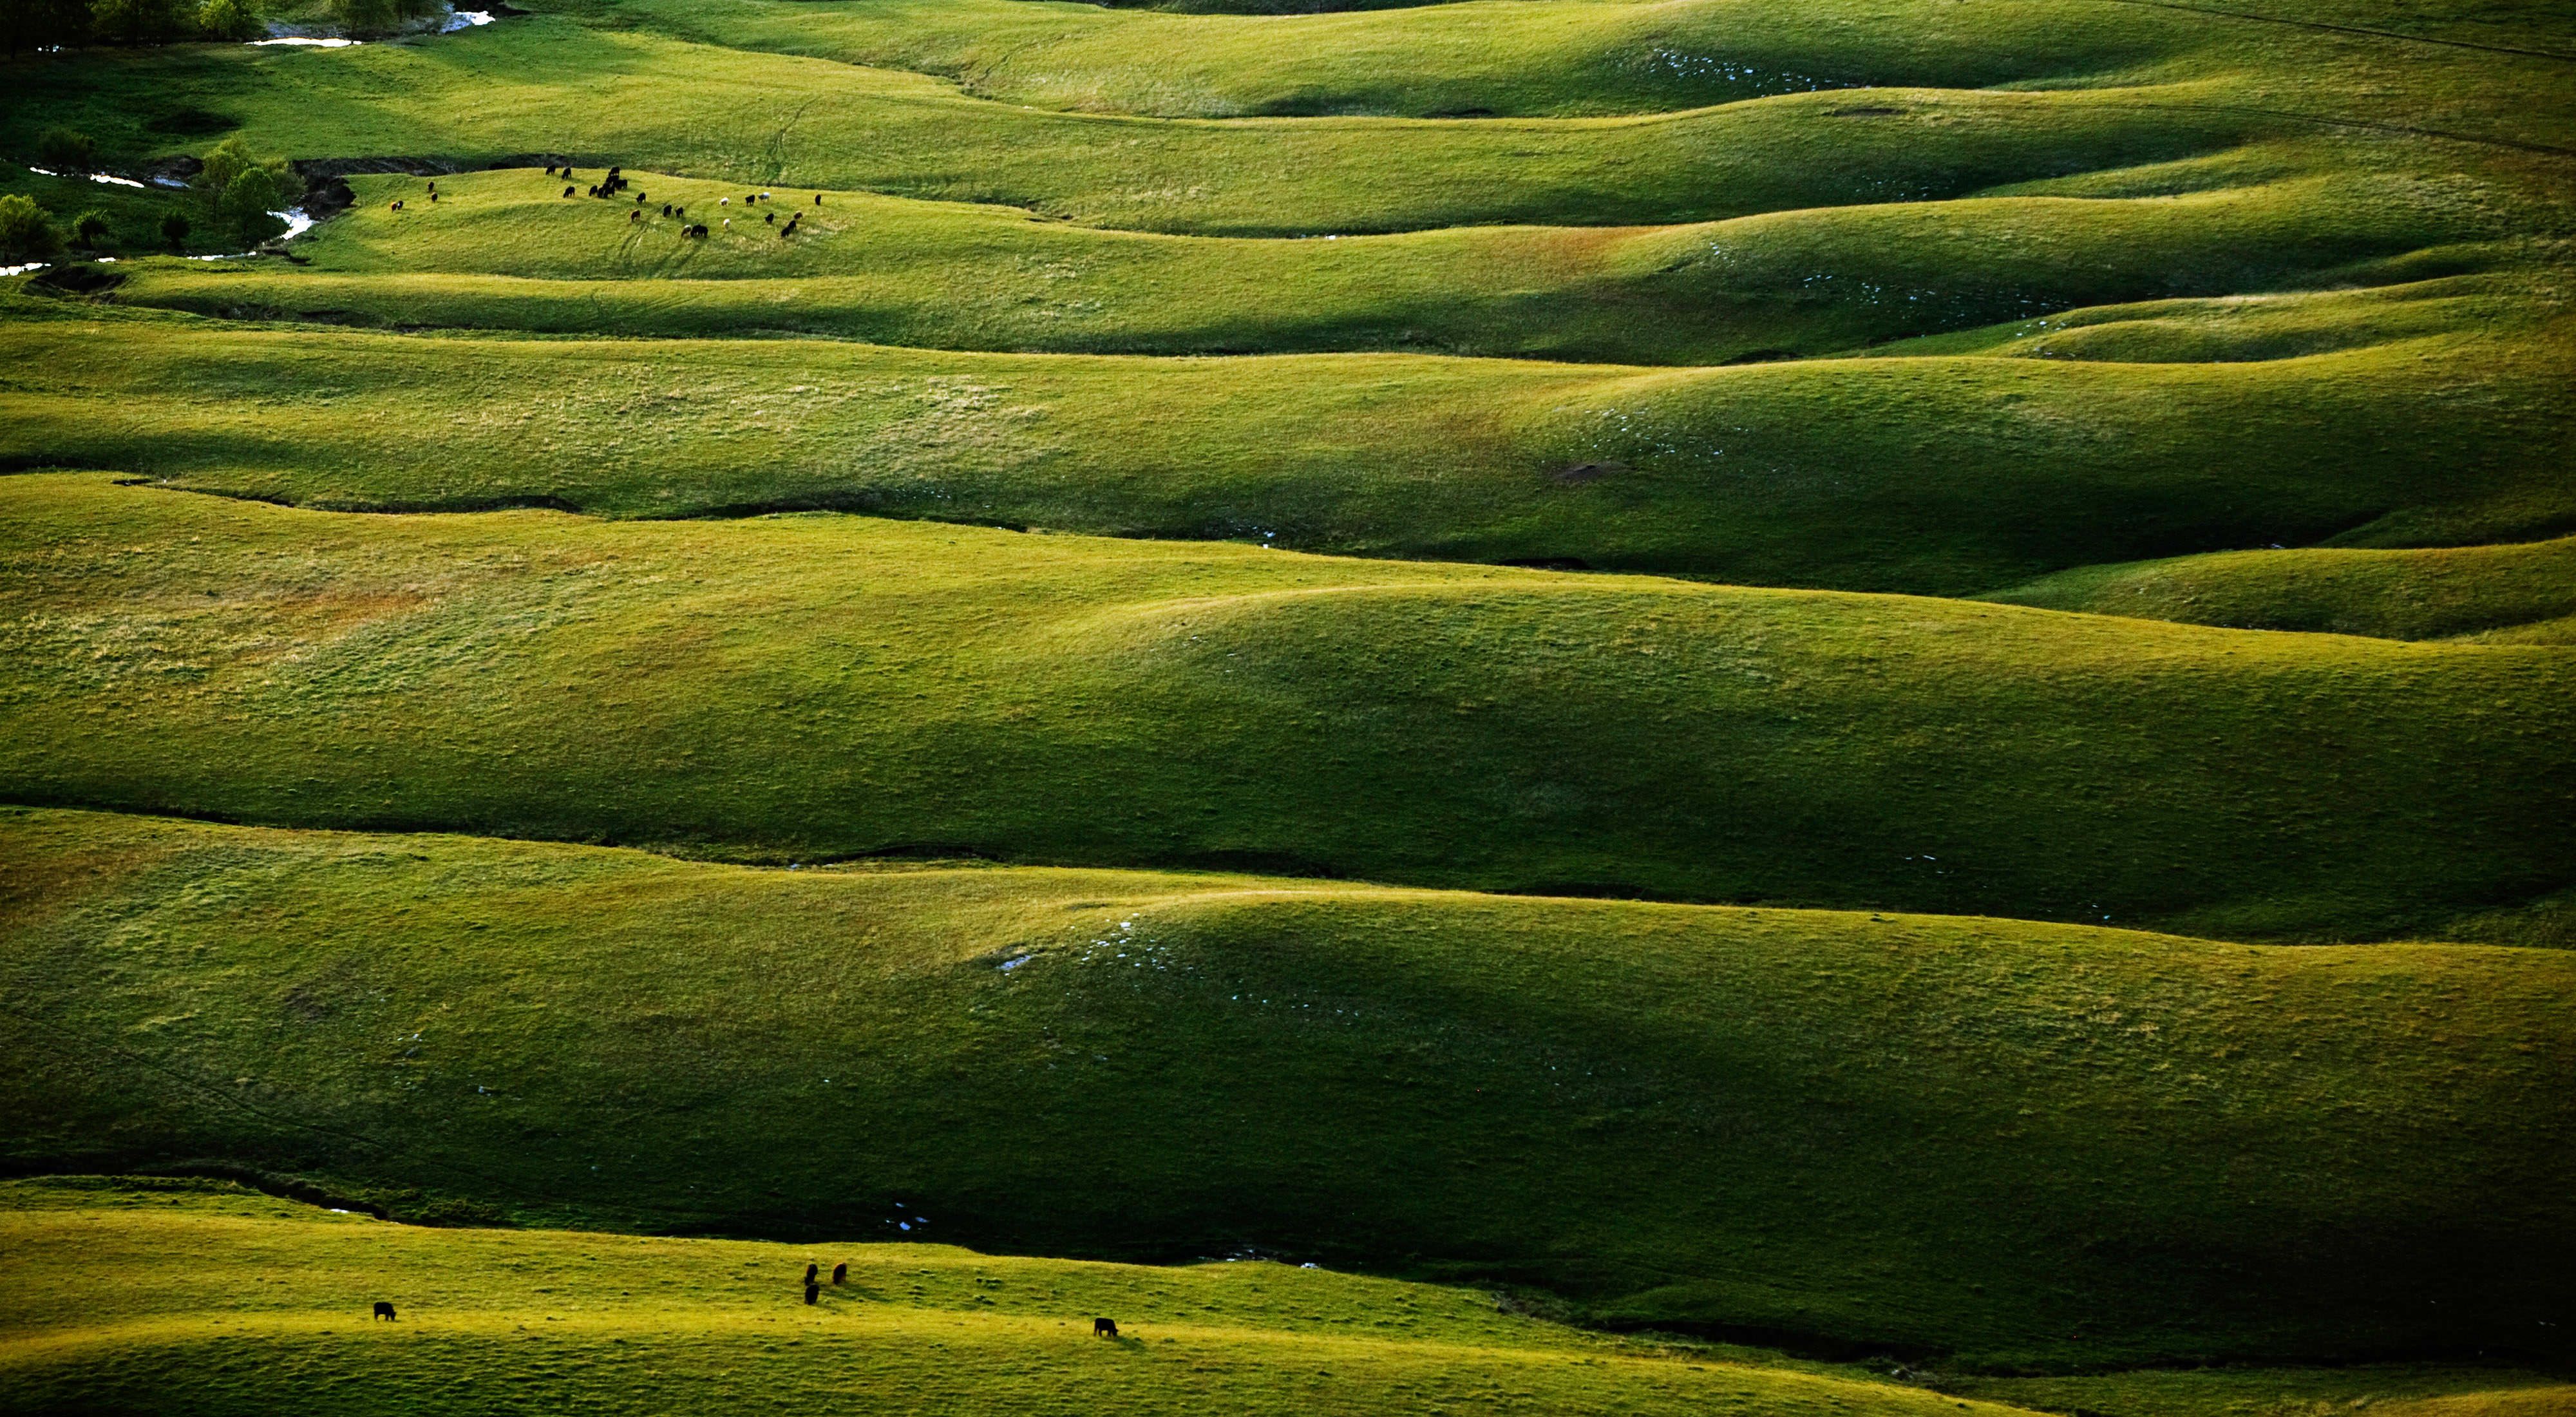 Rolling hills that look like a wrinkled green blanket of grass.